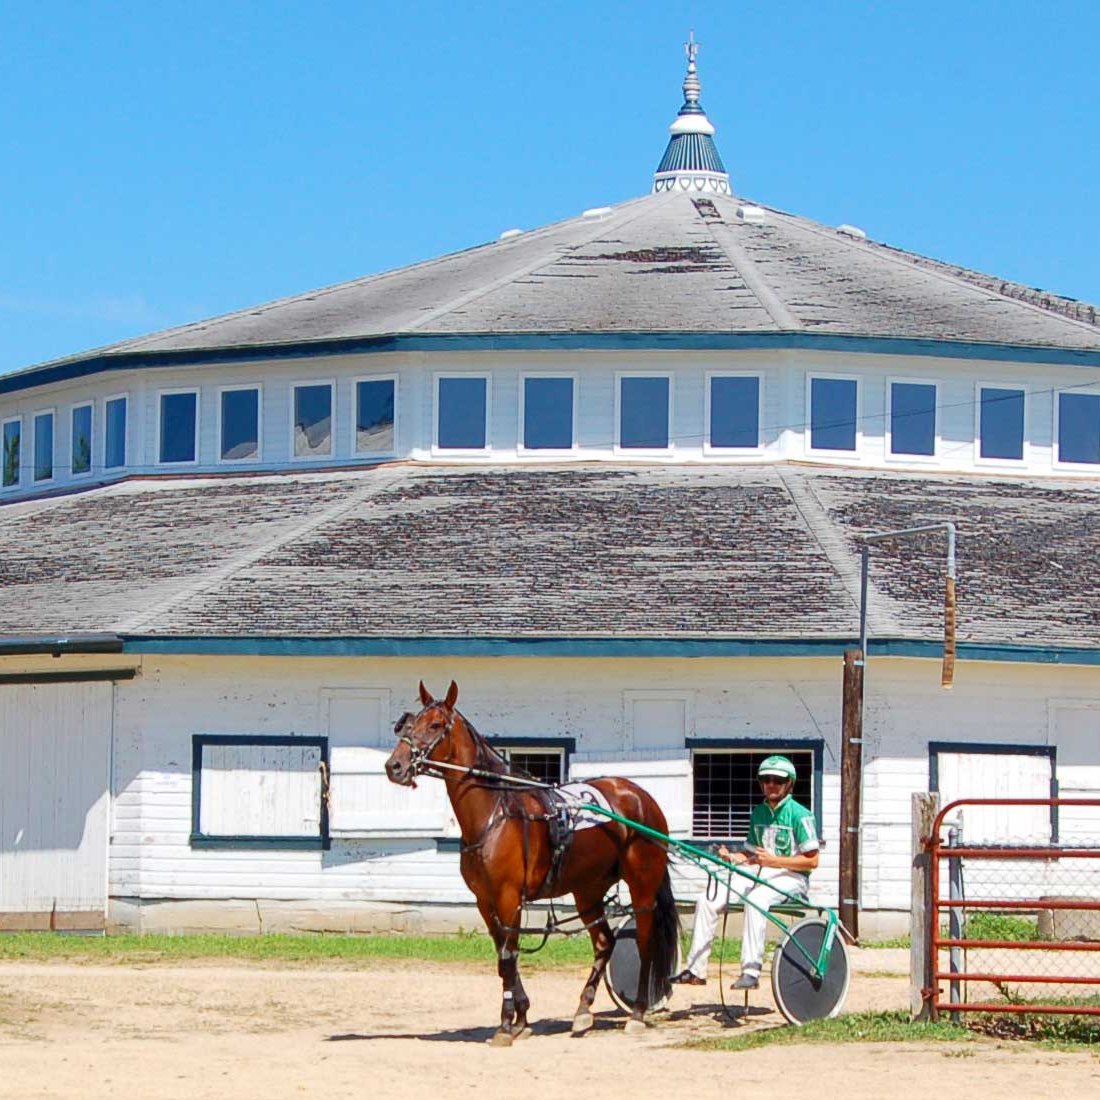 a horse and carriage stand in front of a white round building